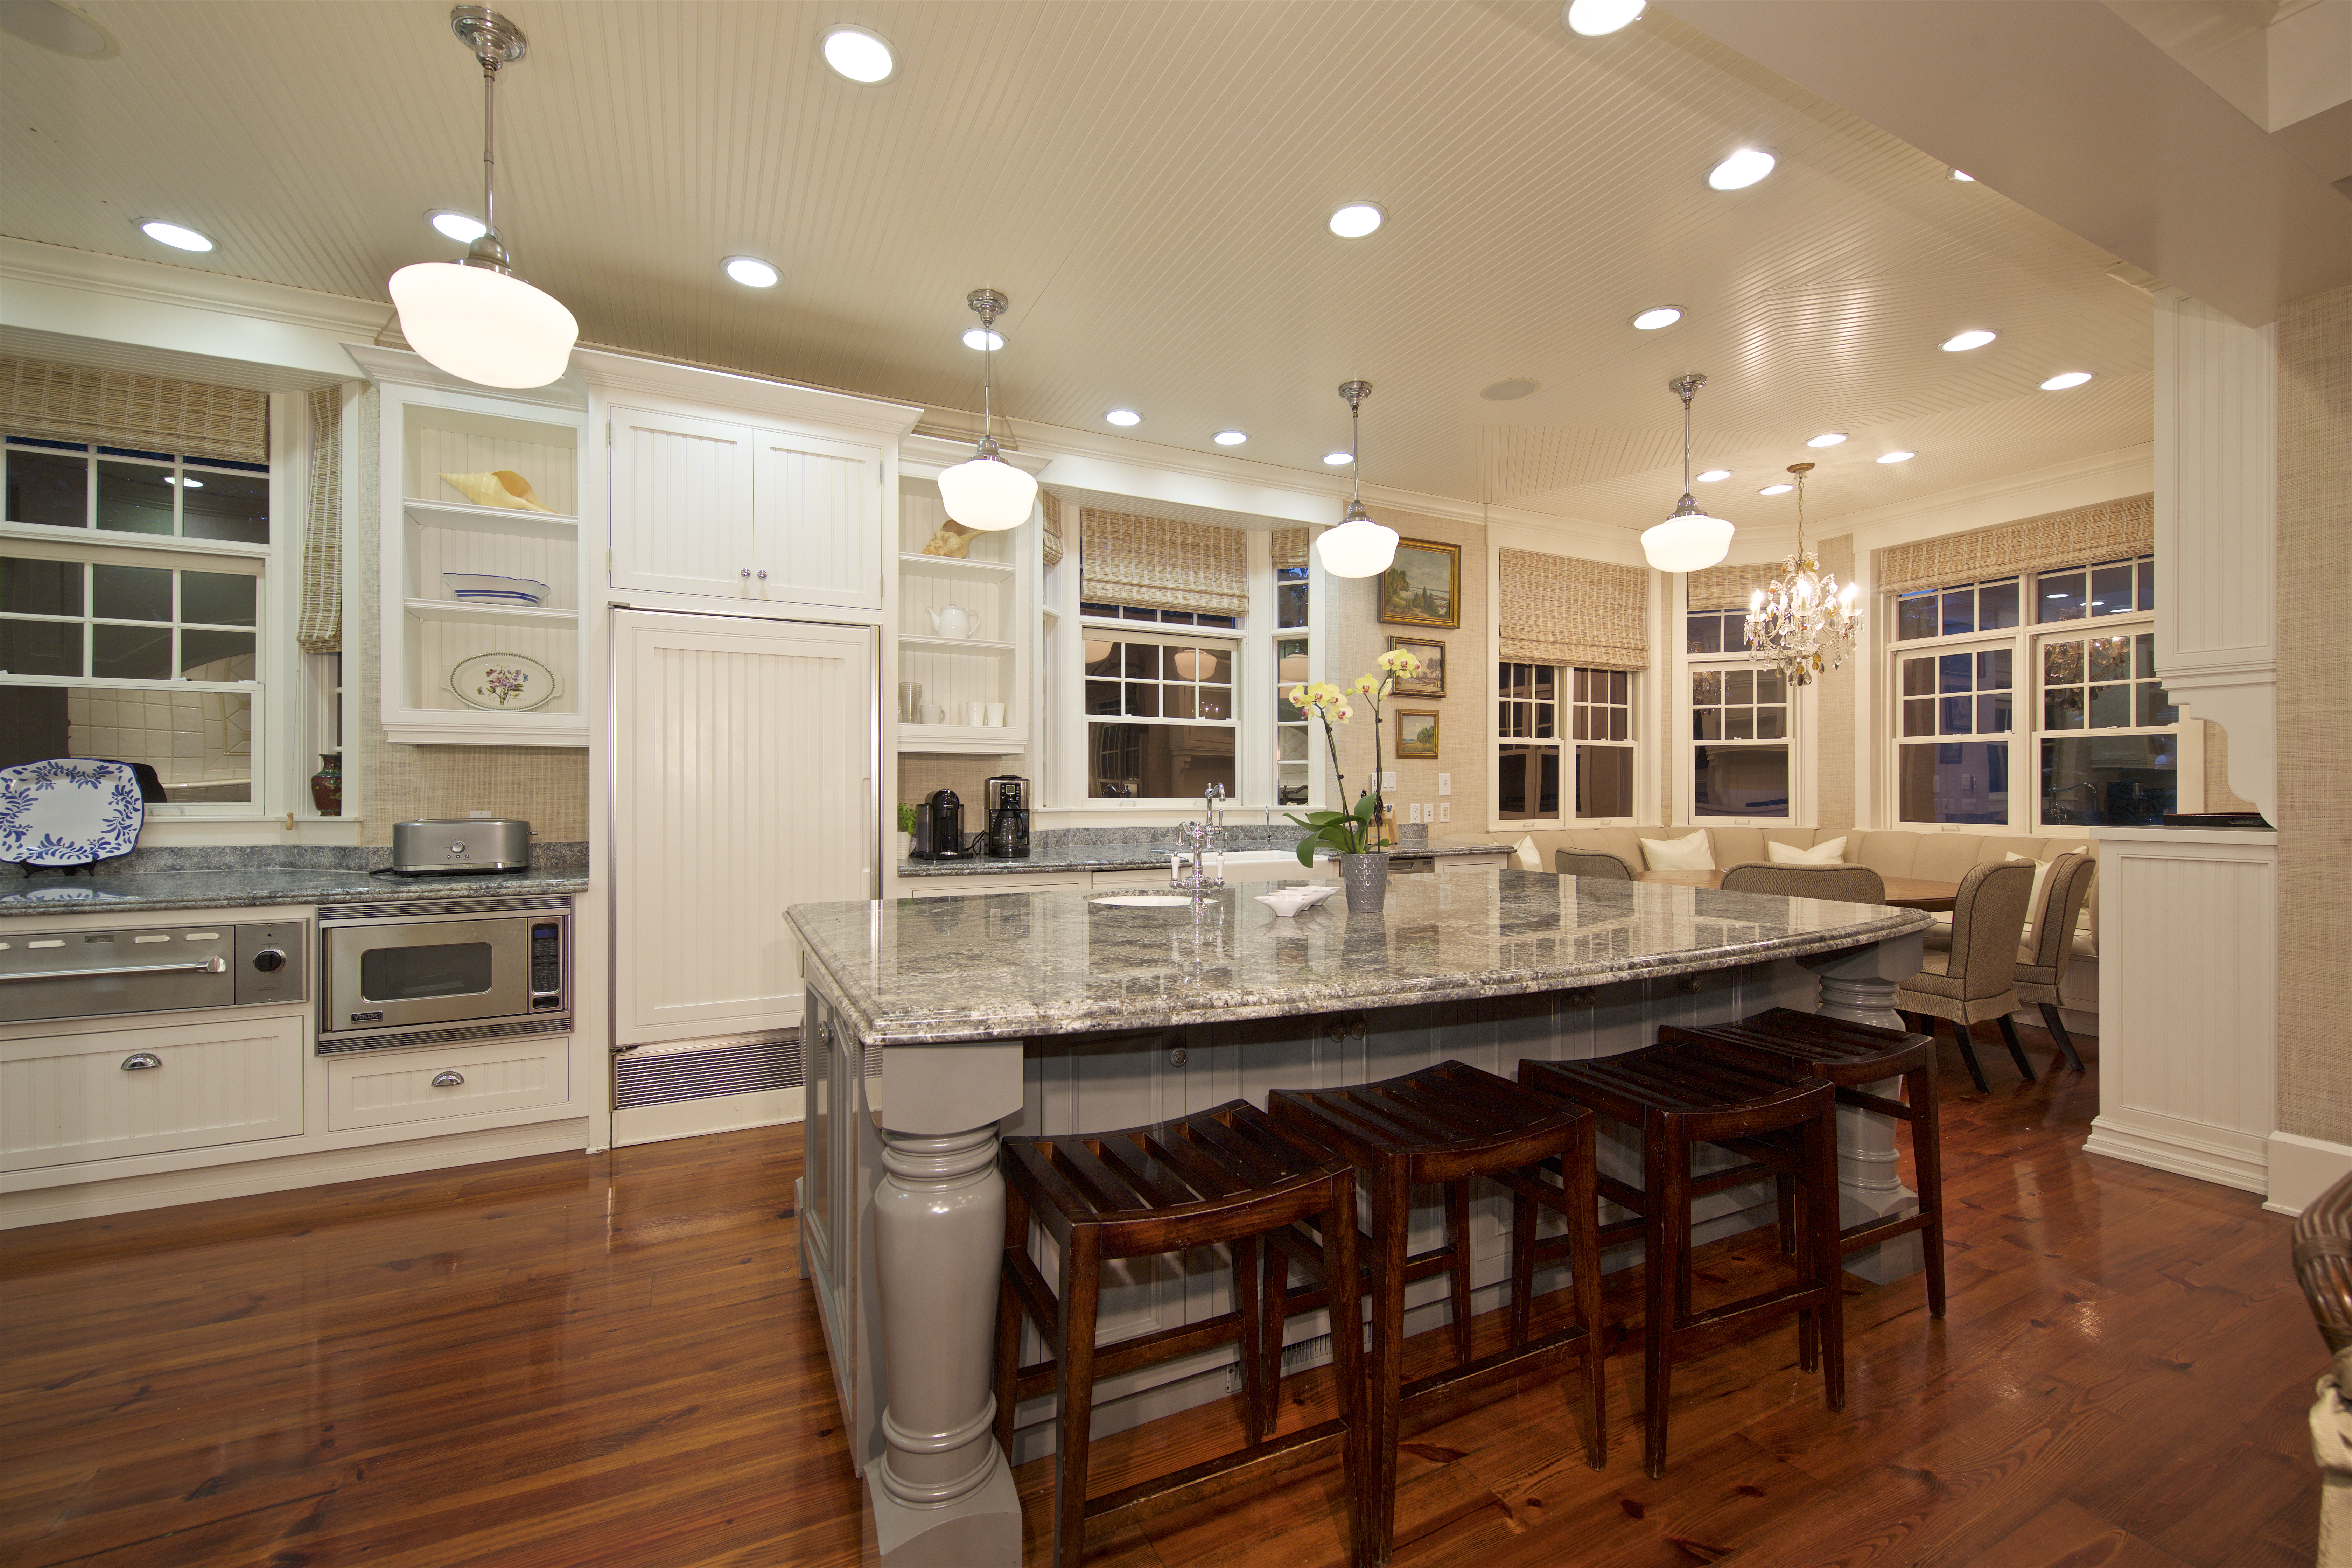 Luxurious kitchen in Coronado home for sale, featuring granite island and bar seating